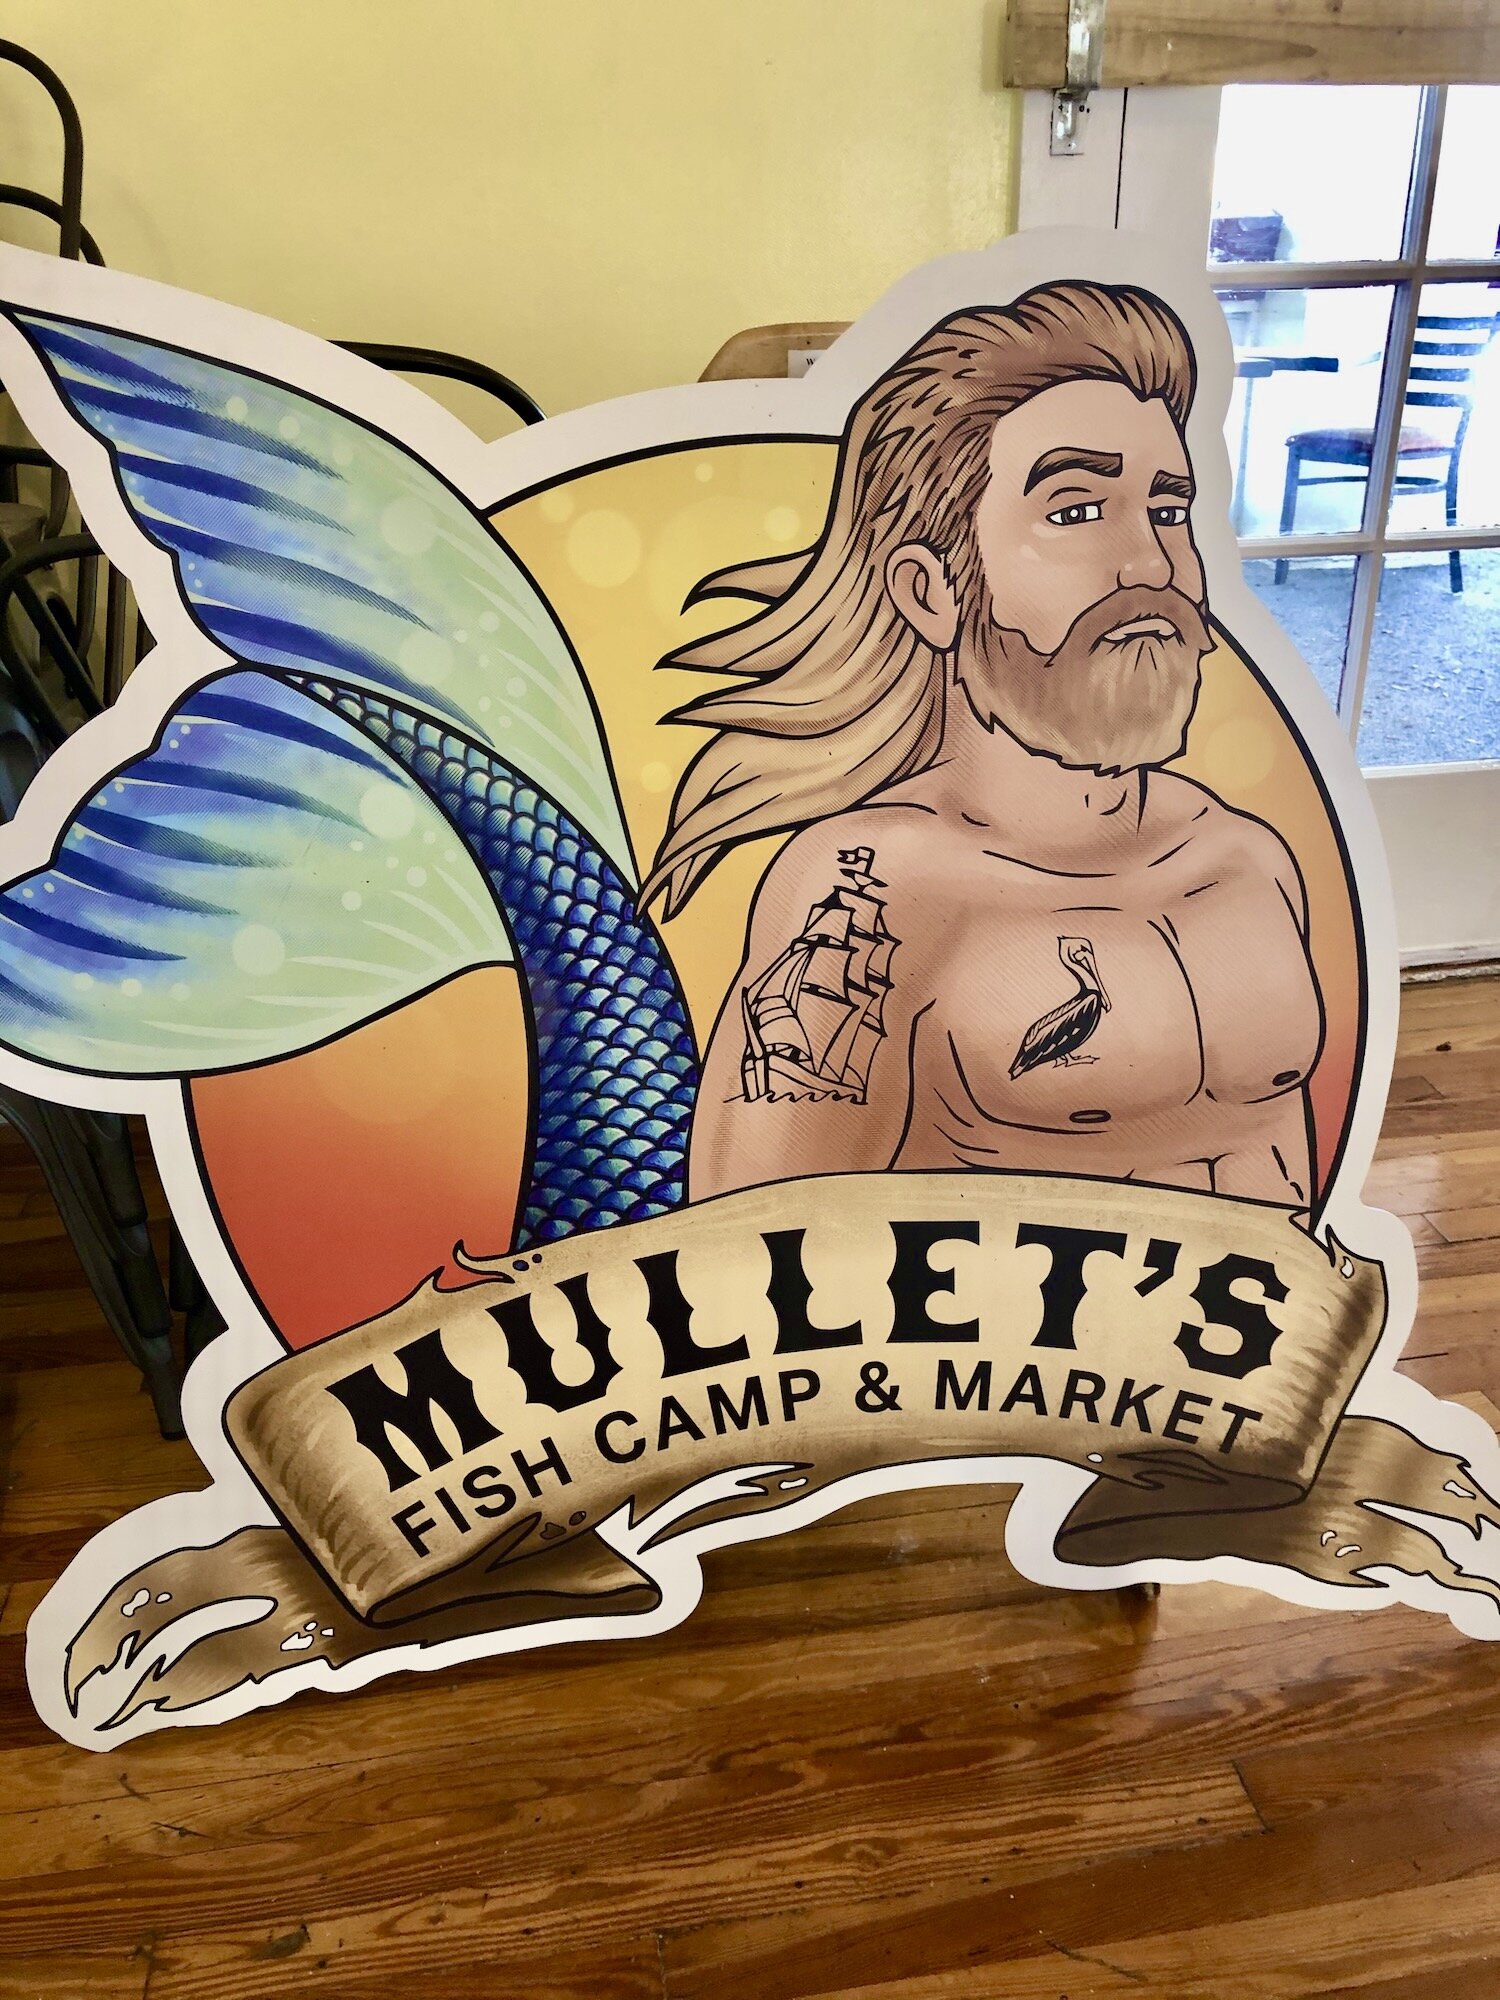 Mullet’s Fish Camp and Market embodies the heart and soul of the mullet hairstyle – business in the front and party in the back